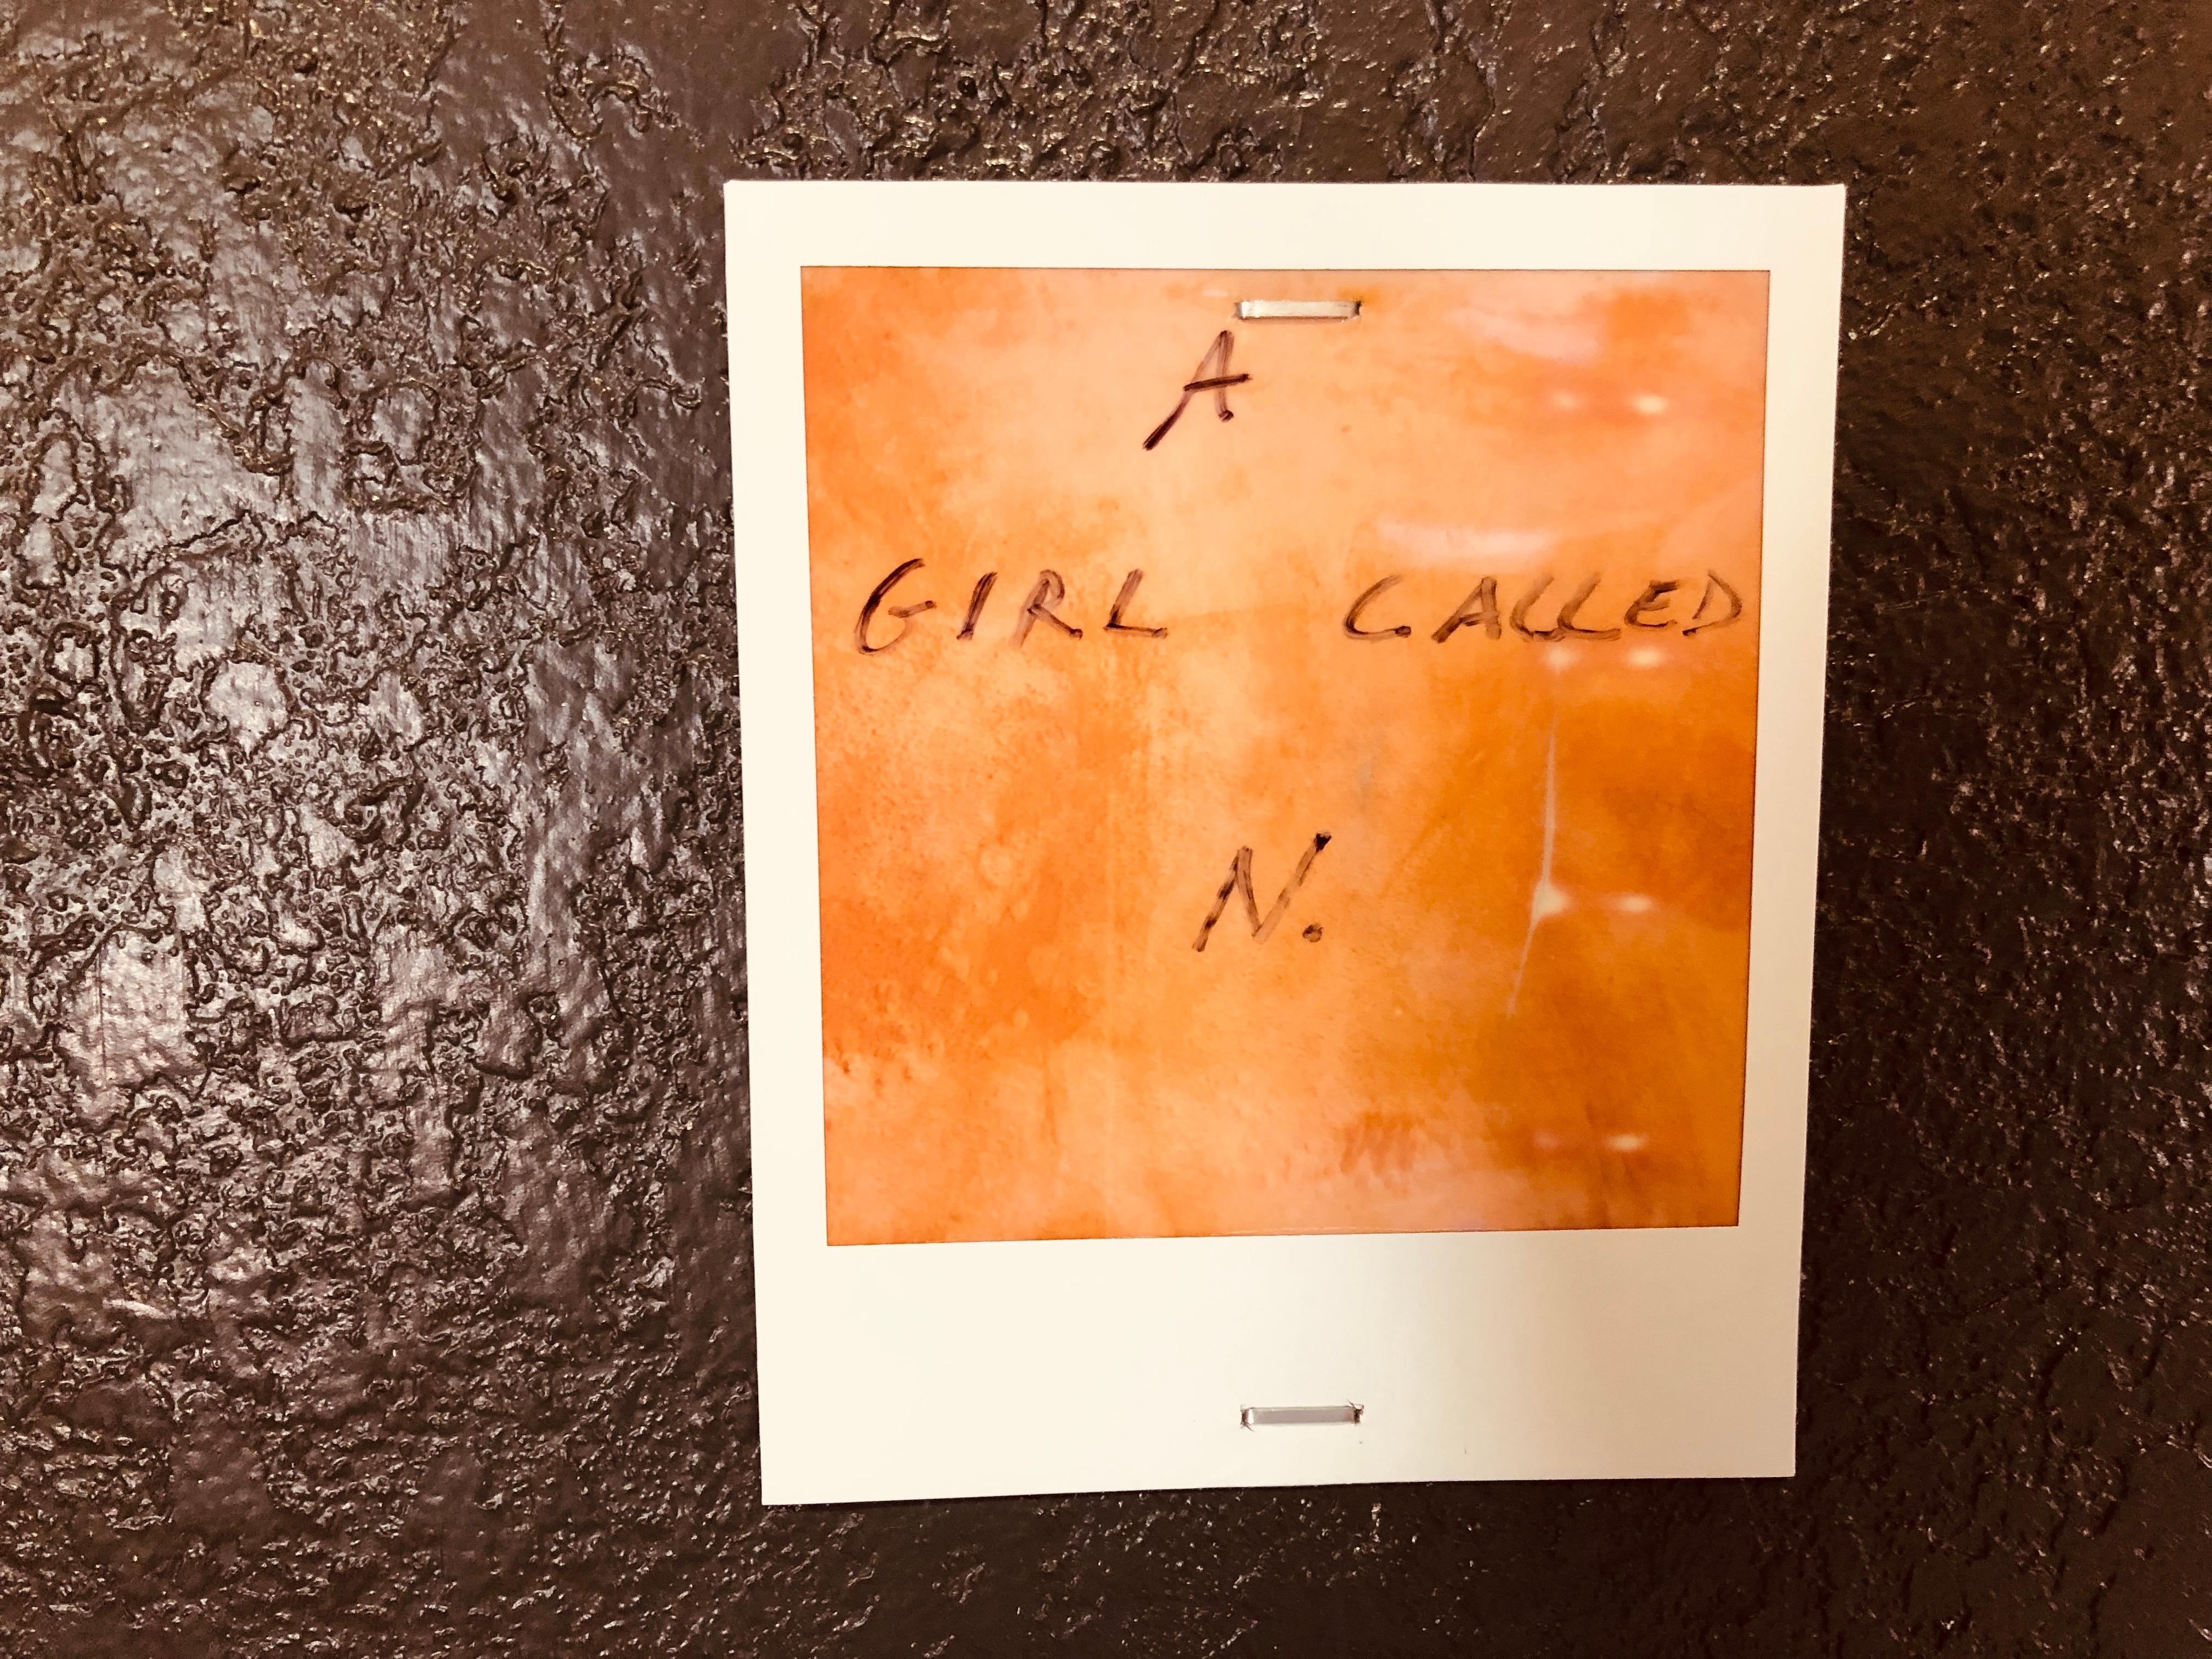 'Situation' part of the series 'A Girl called N.' 2019, 20x20cm, Edition 1/7 plus 2 Artist Proofs, digital C-Print based on a Polaroid, not mounted. Signed on the back and with certificate. Artist inventory PL2019-511.

This piece is part of